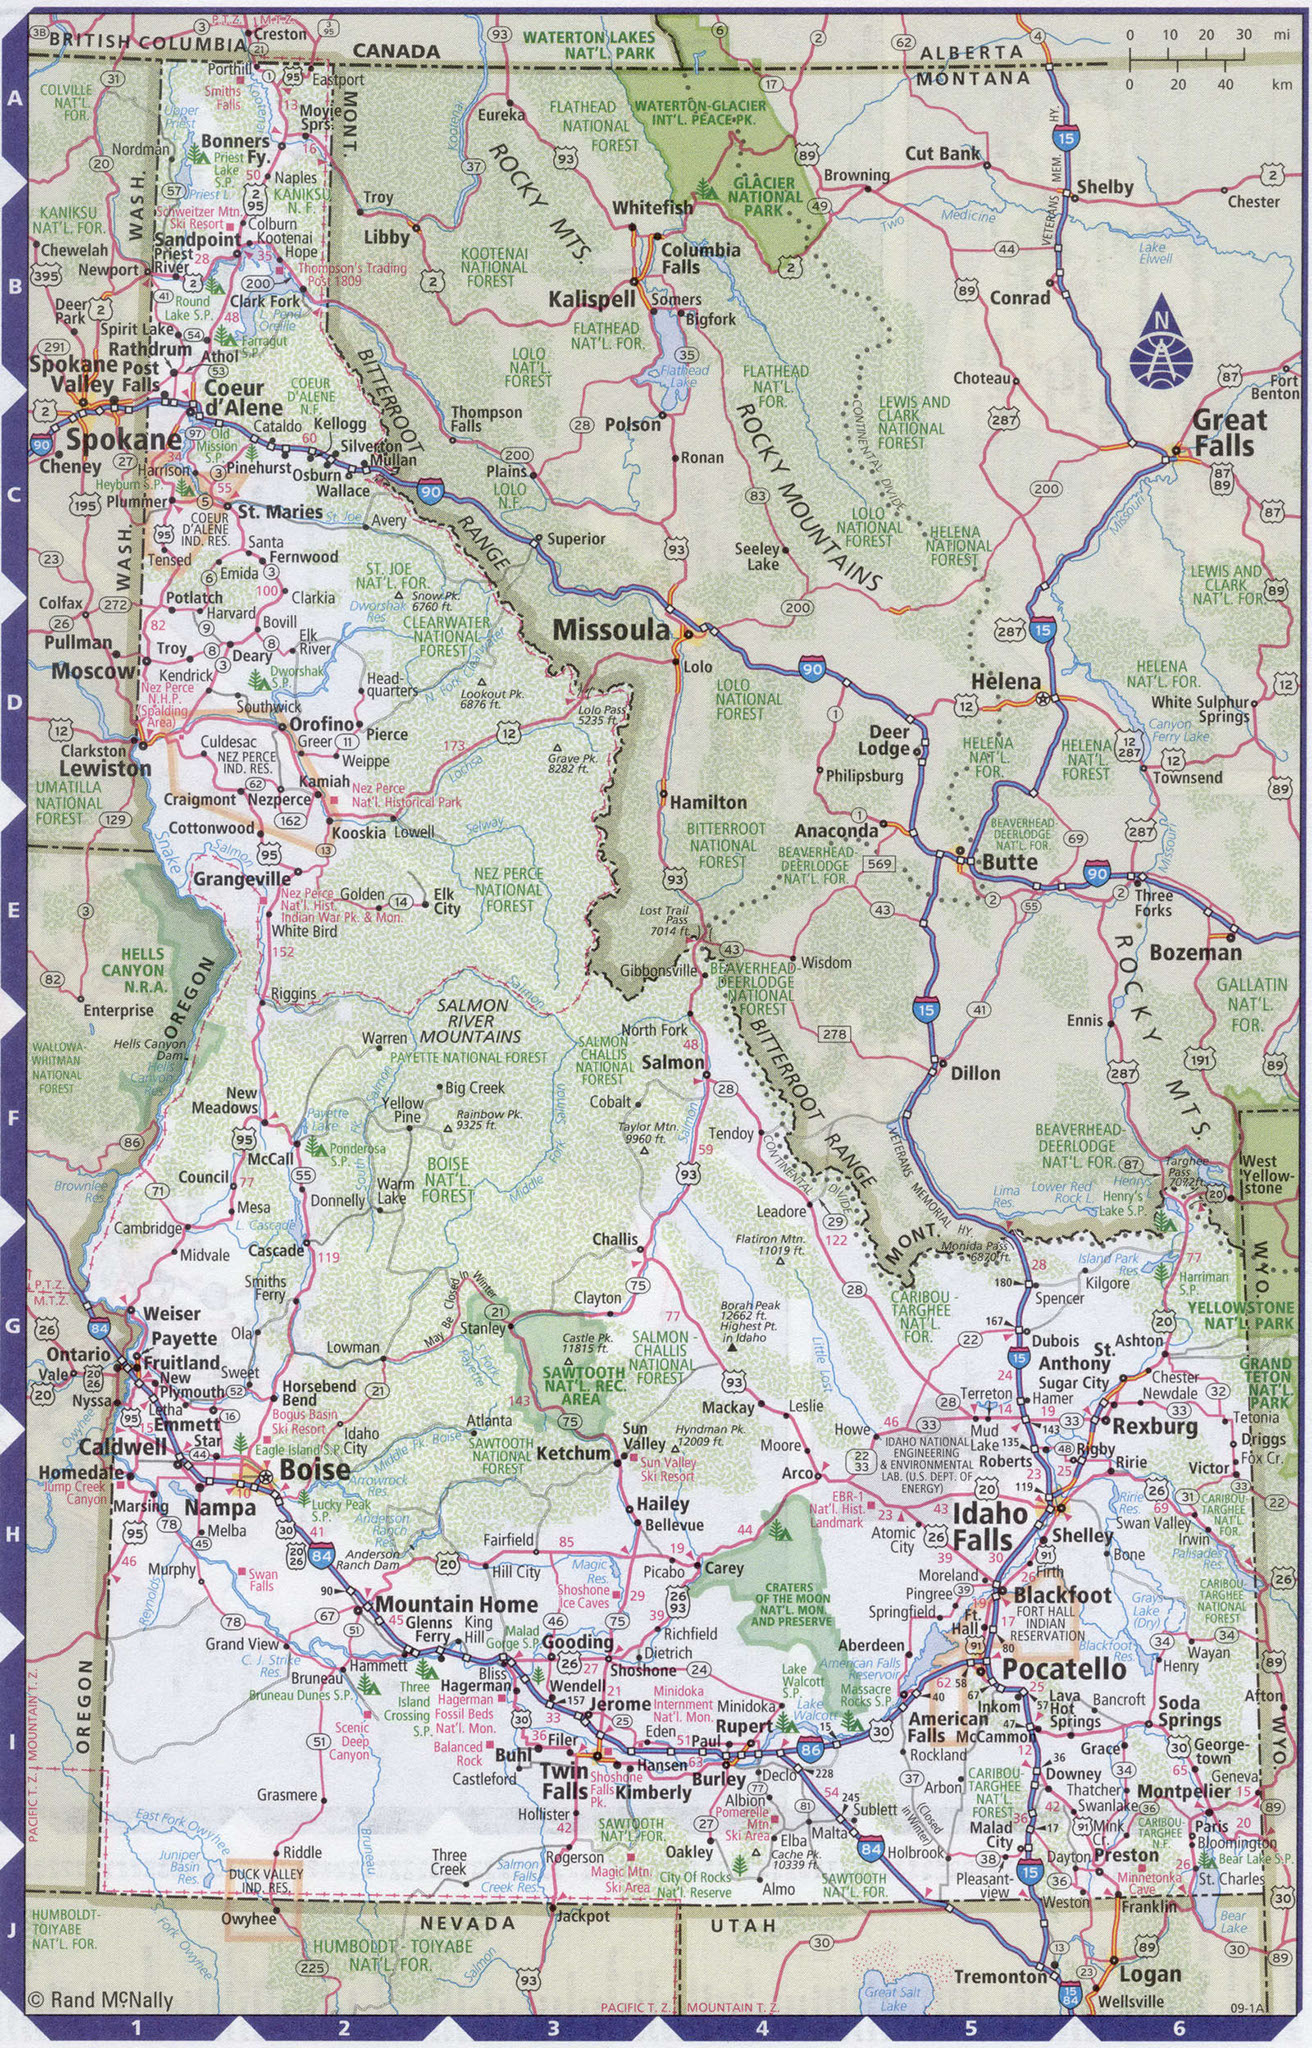 Idaho state complete map